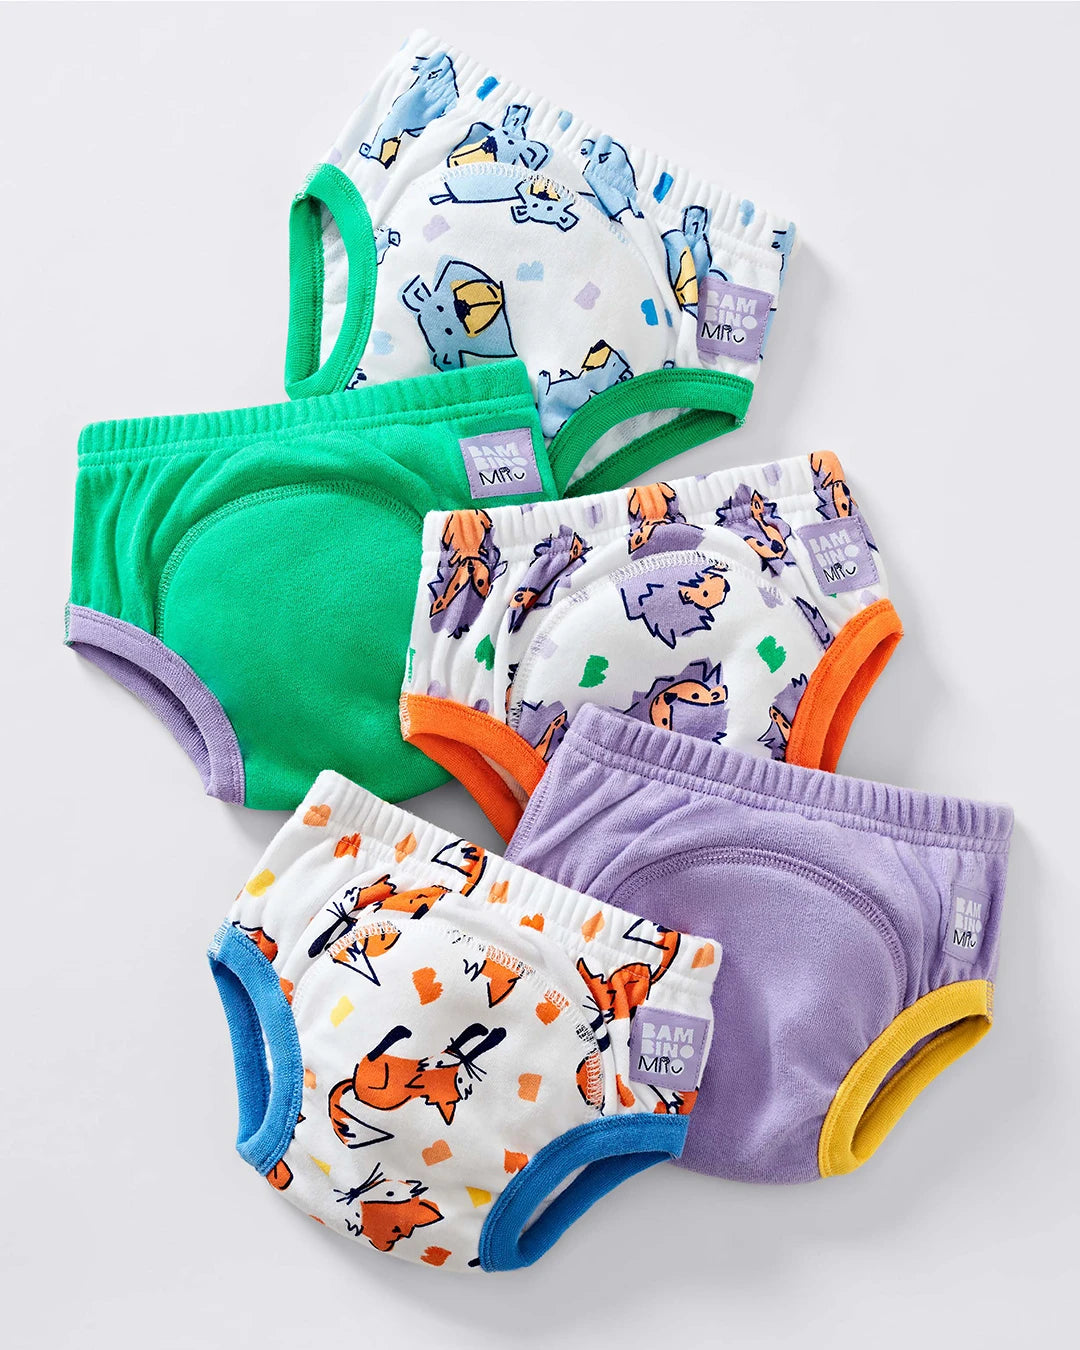 Training Pants that look and work like Undies, The Bummis Potty